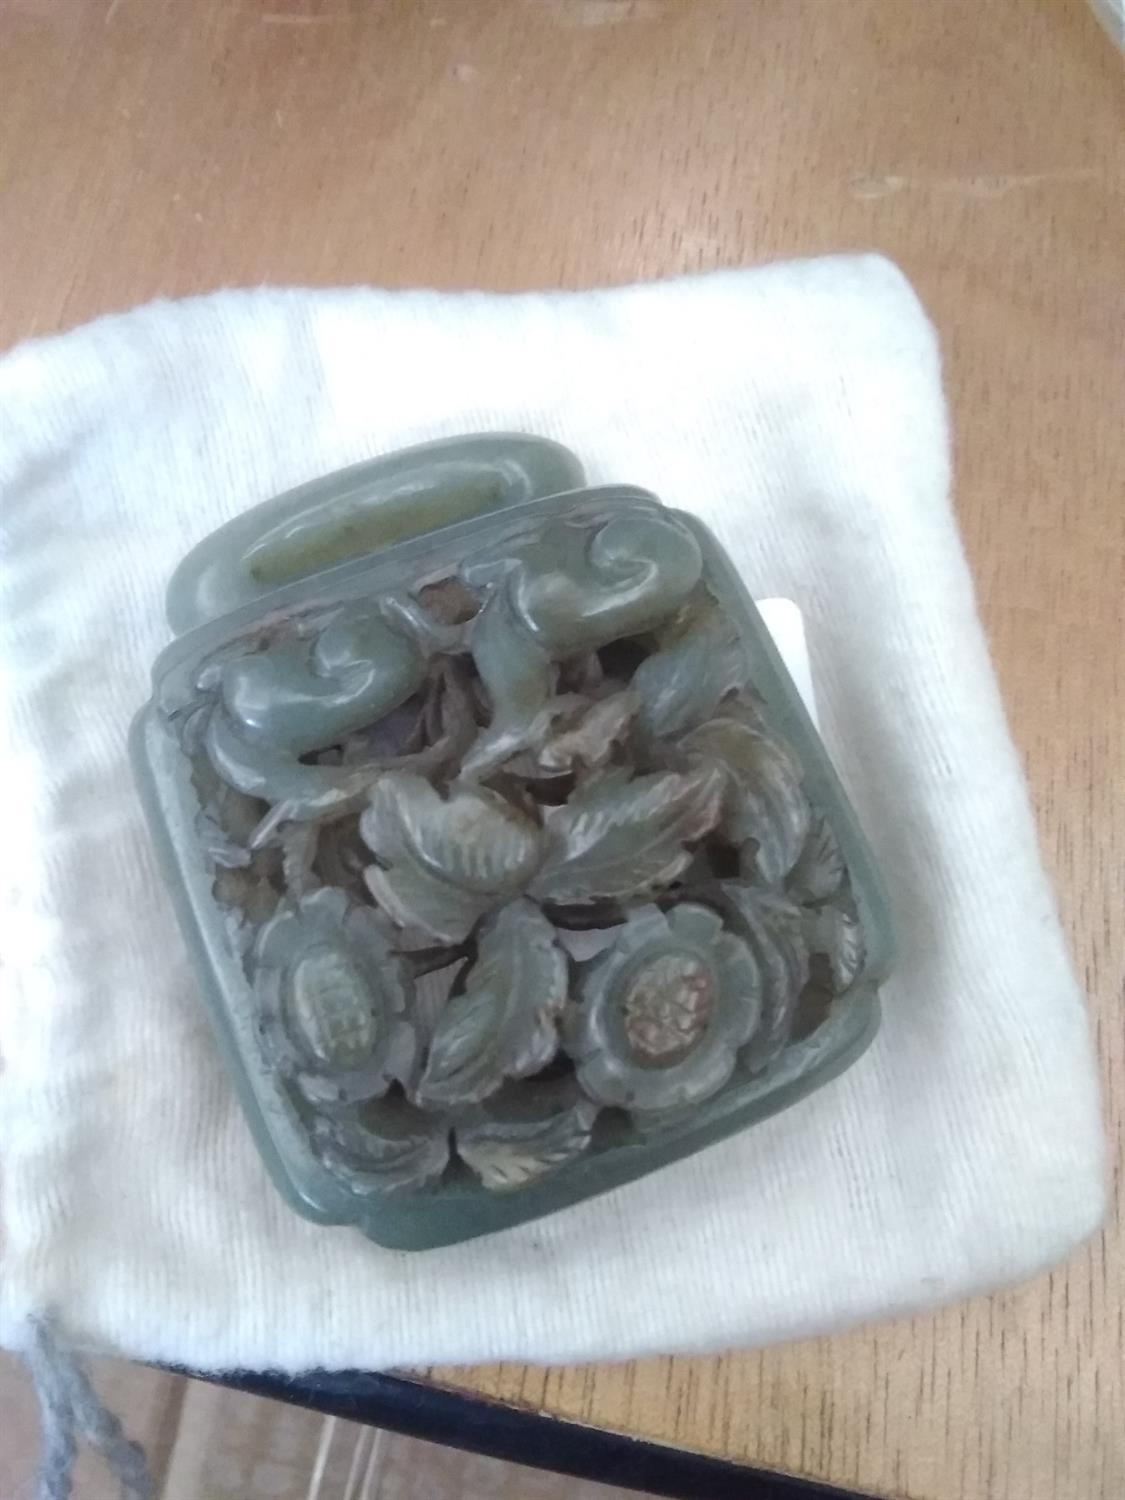 A LIAO STYLE ‘AUTUMN FOREST / QIUSHAN YUAN' CELADON JADE ELEMENT OF A BELT BUCKLE / HOOK China, - Image 5 of 5